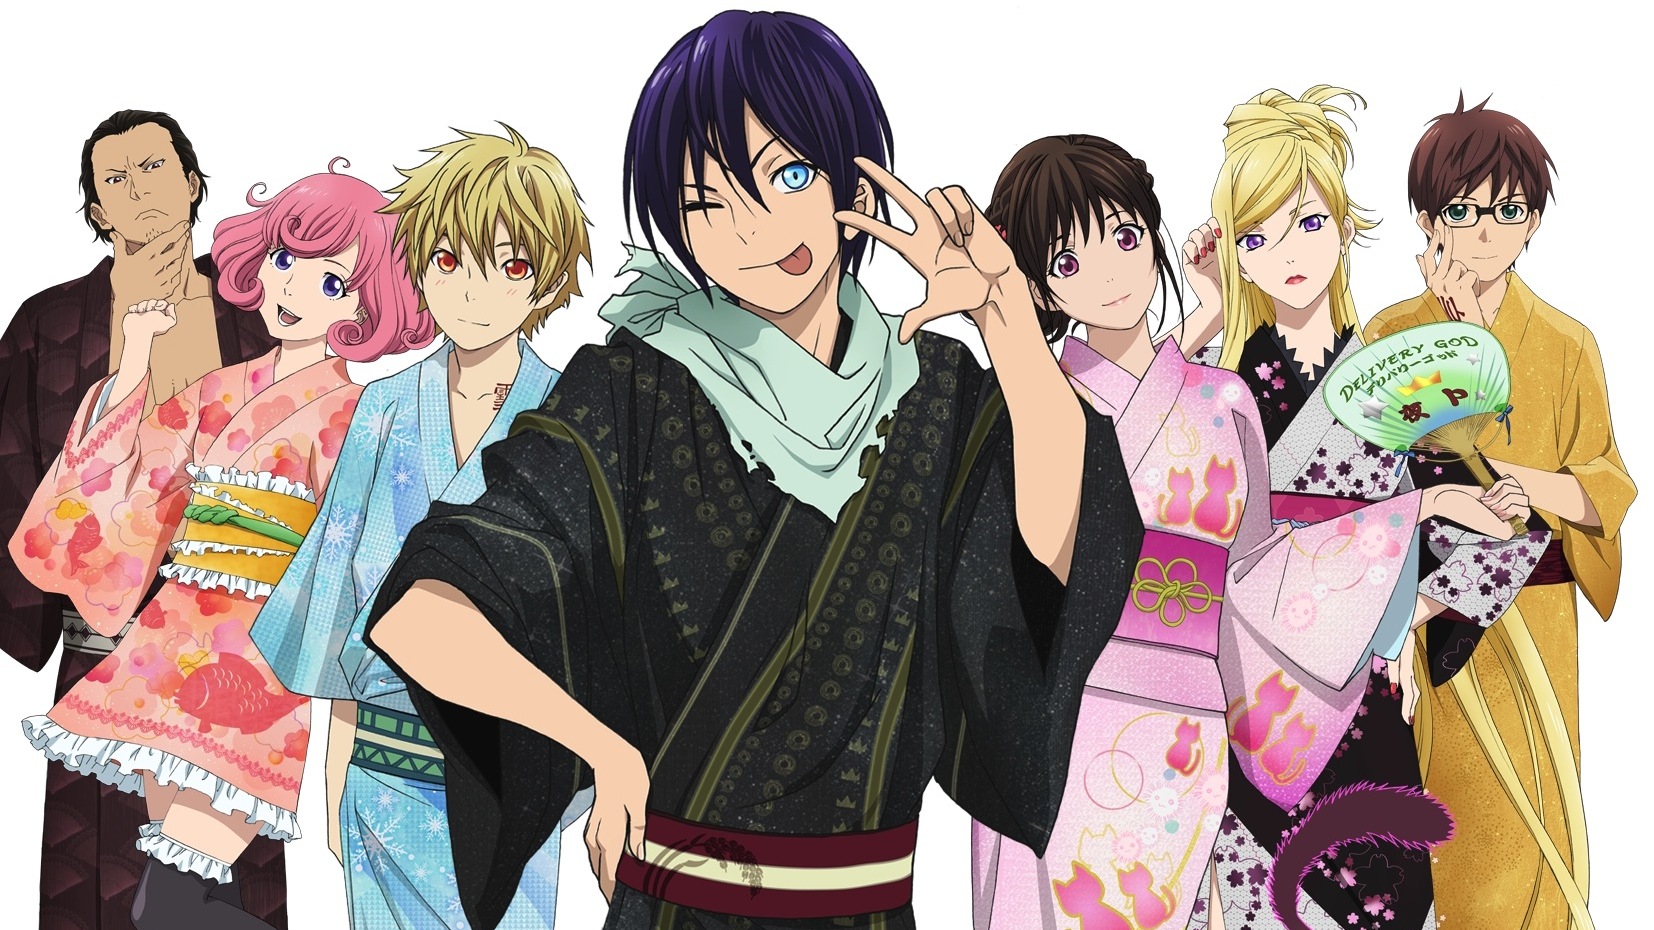 Free Download 32 Noragami Hd Wallpapers Backgrounds 1654x930 For Your Desktop Mobile Tablet Explore 45 Hd Noragami Wallpaper Noragami Yato Wallpaper Noragami Wallpaper 19x1080 Noragami Iphone Wallpaper